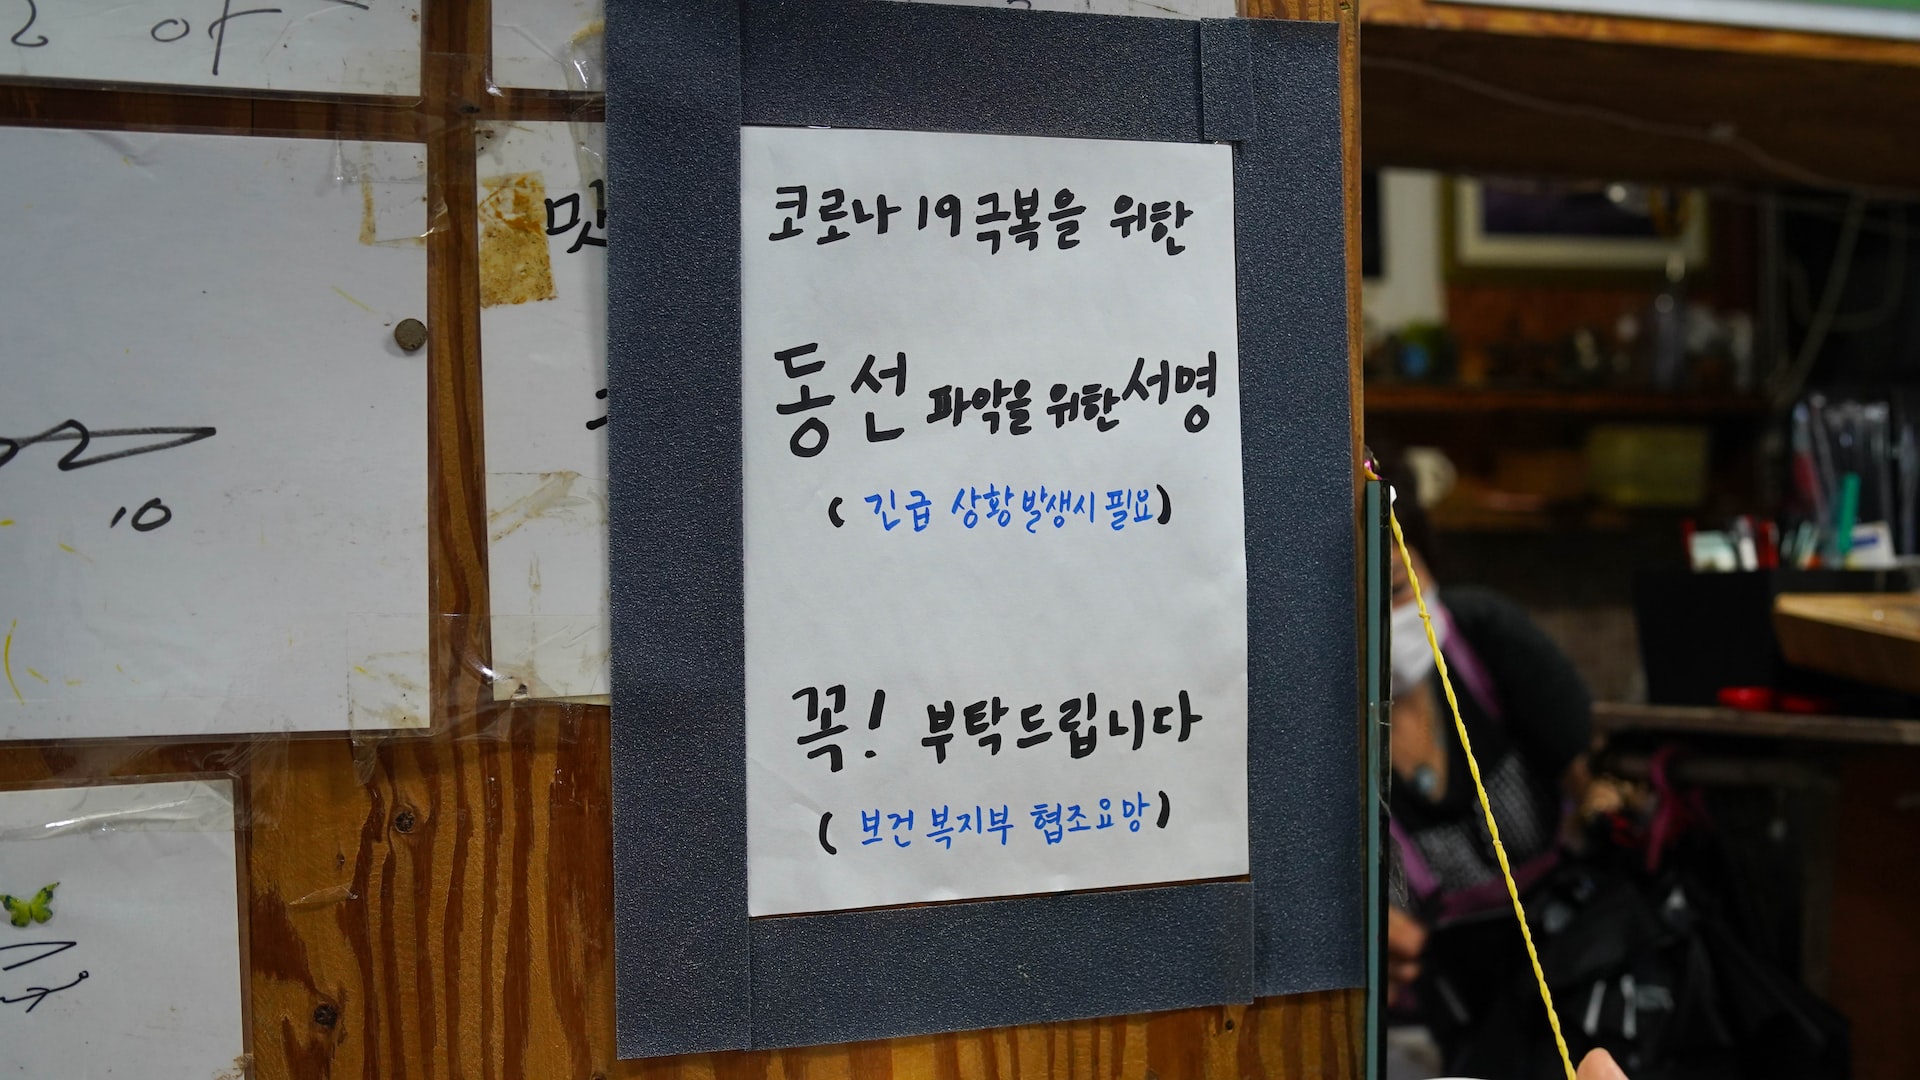 A COVID-19 notice on black and blue ink on a white paper in Hangul posted on a wall